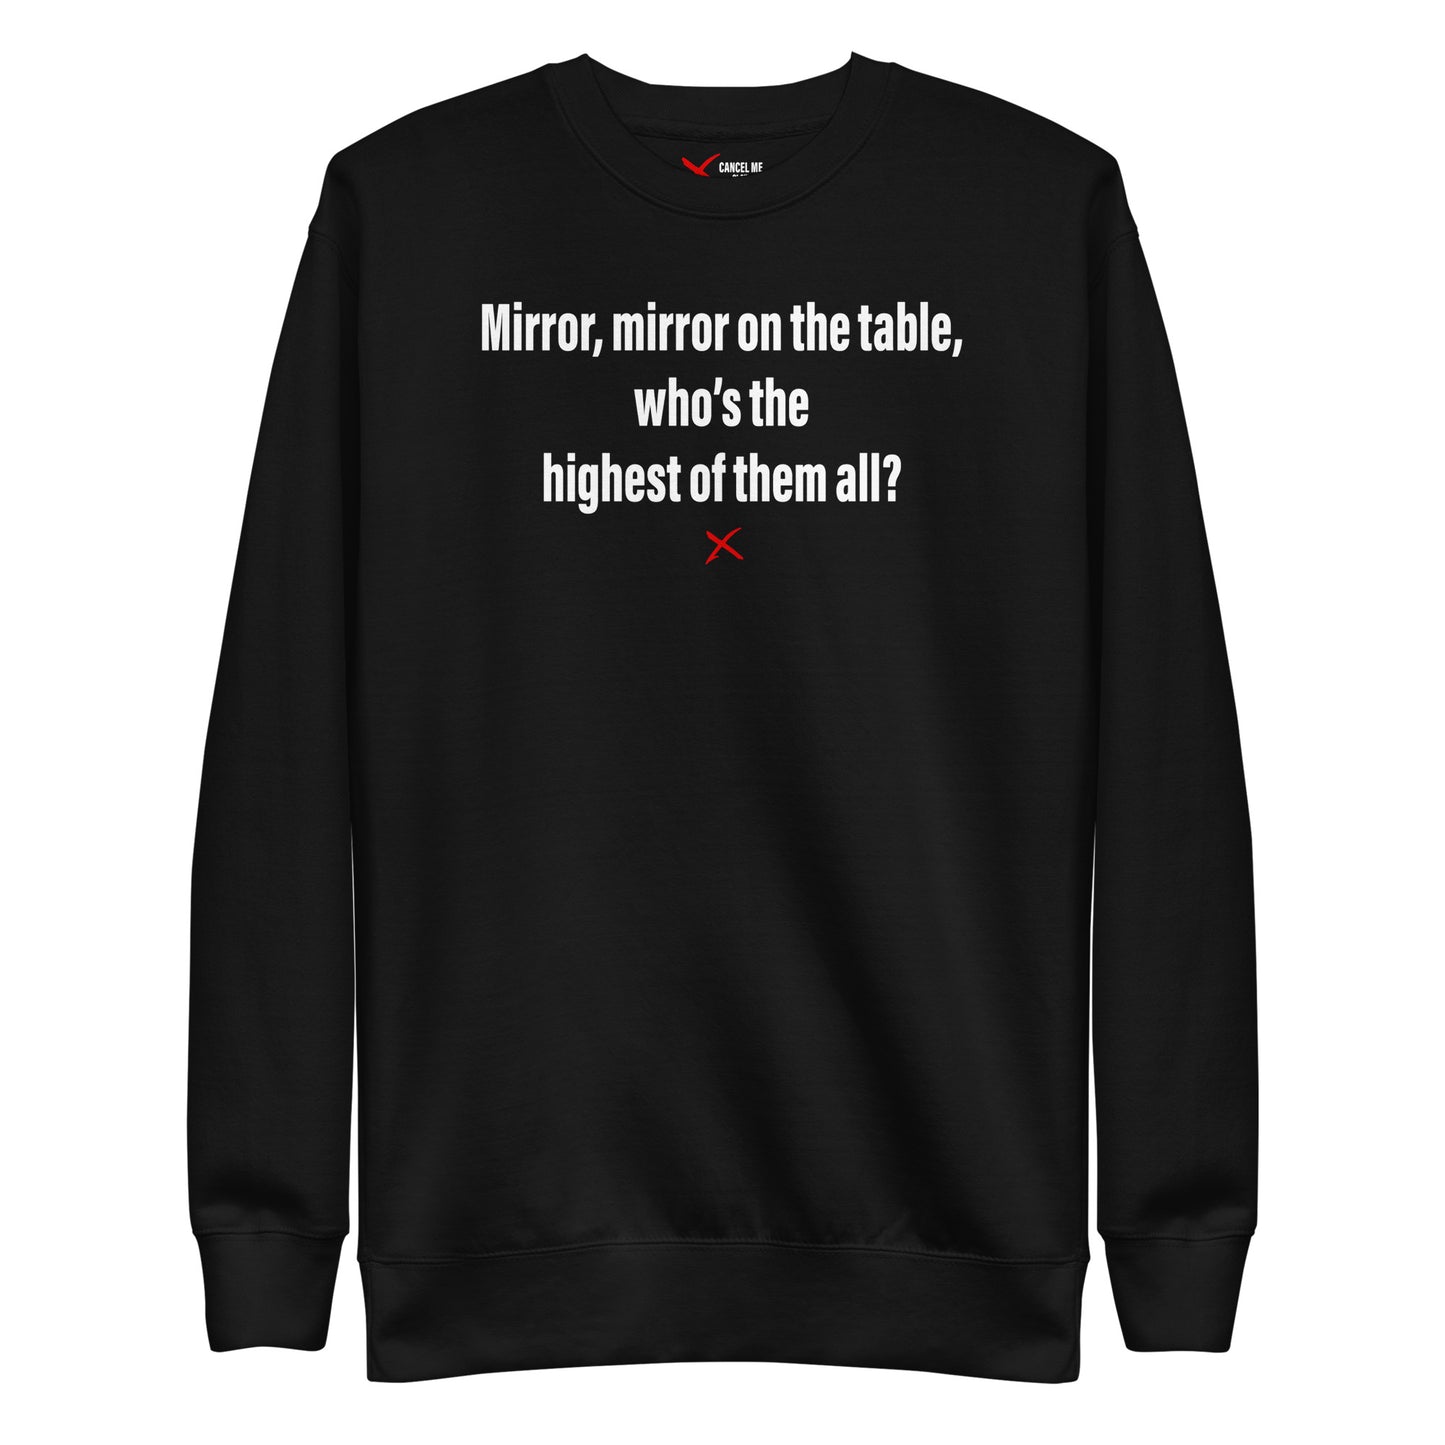 Mirror, mirror on the table, who's the highest of them all? - Sweatshirt